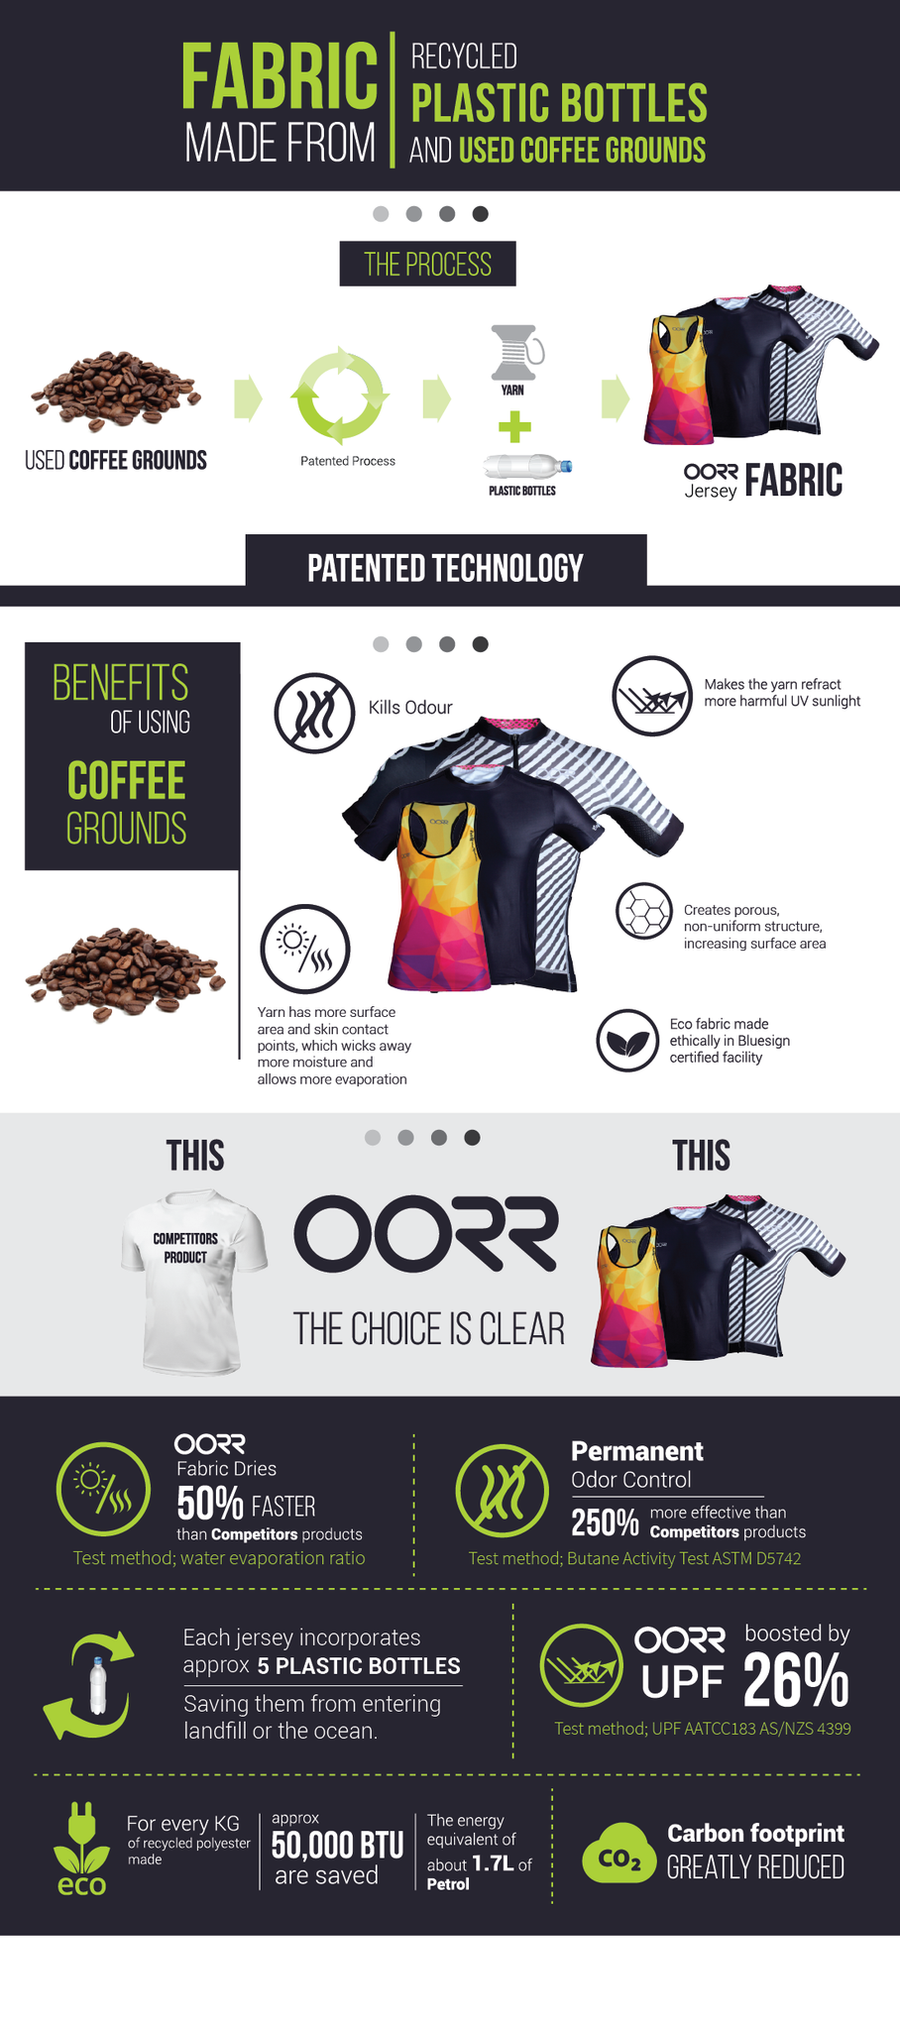 OORR Cafe Pro ‘Boorrdroom’ Cycling Jersey - SpinWarriors